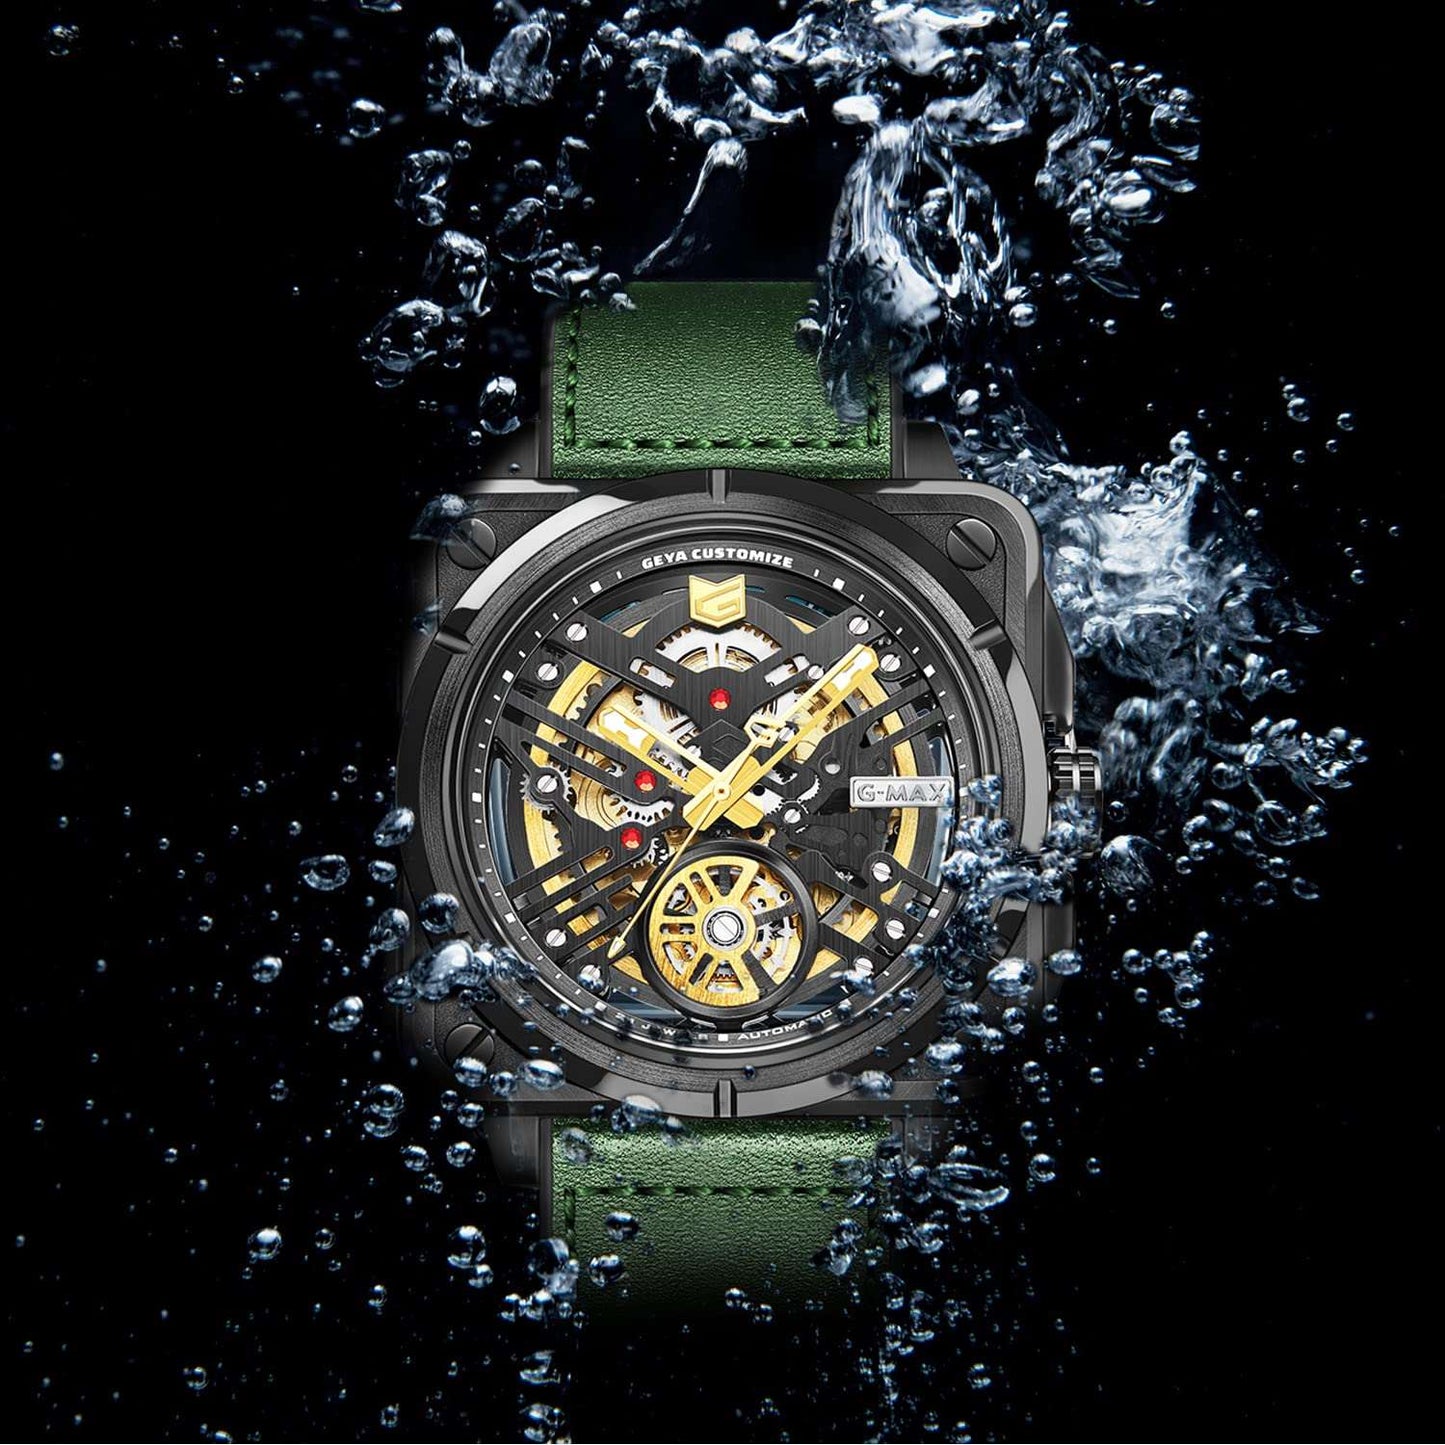 Automatic Mechanical Watch Skeleton Stainless 50M Waterproof Anti Shock Casual Diver Men Wrist Watch Sterling Watches Chronograph Analog Business Casual Fashion Adjustable Leather Band Phil and Gazelle